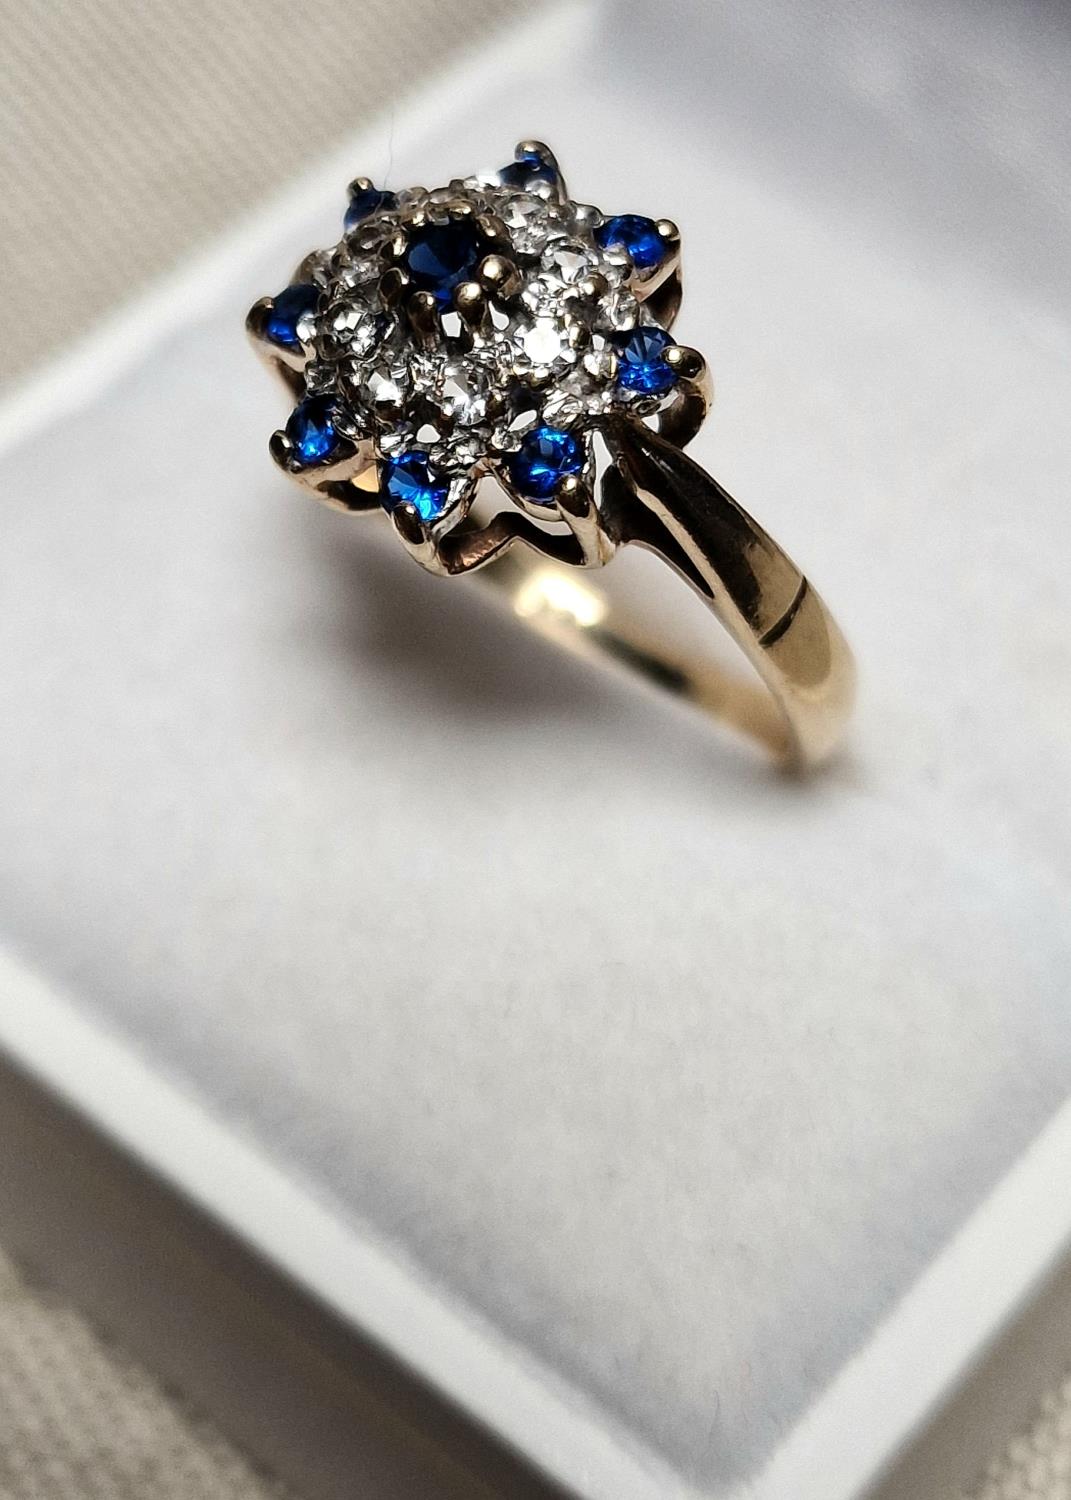 9ct Gold, Diamond & Sapphire Cluster Ring, size O+0.5 & 3g - Image 2 of 4